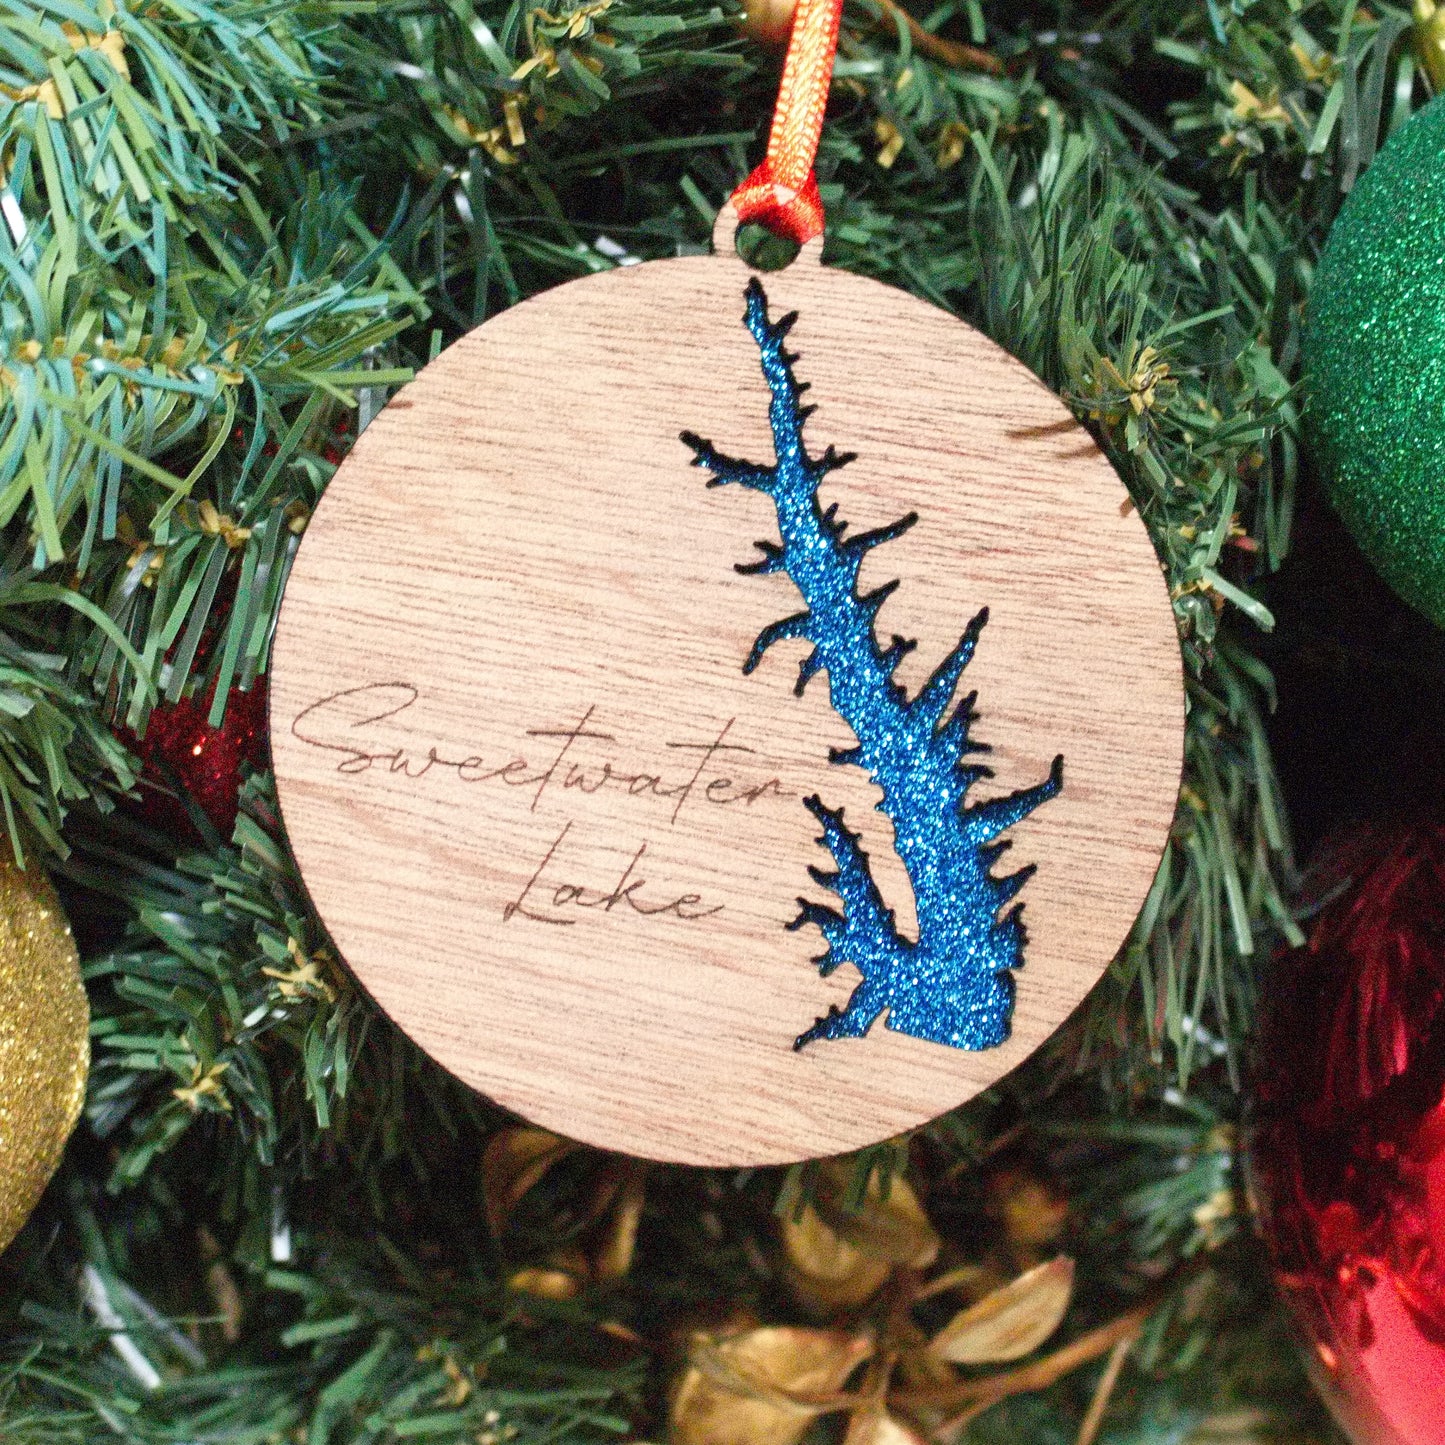 Sweetwater Lake Christmas ornament for the family to remember time spent together on the lake. Made out of wood and acrylic with attention to detail. This is something you will love.